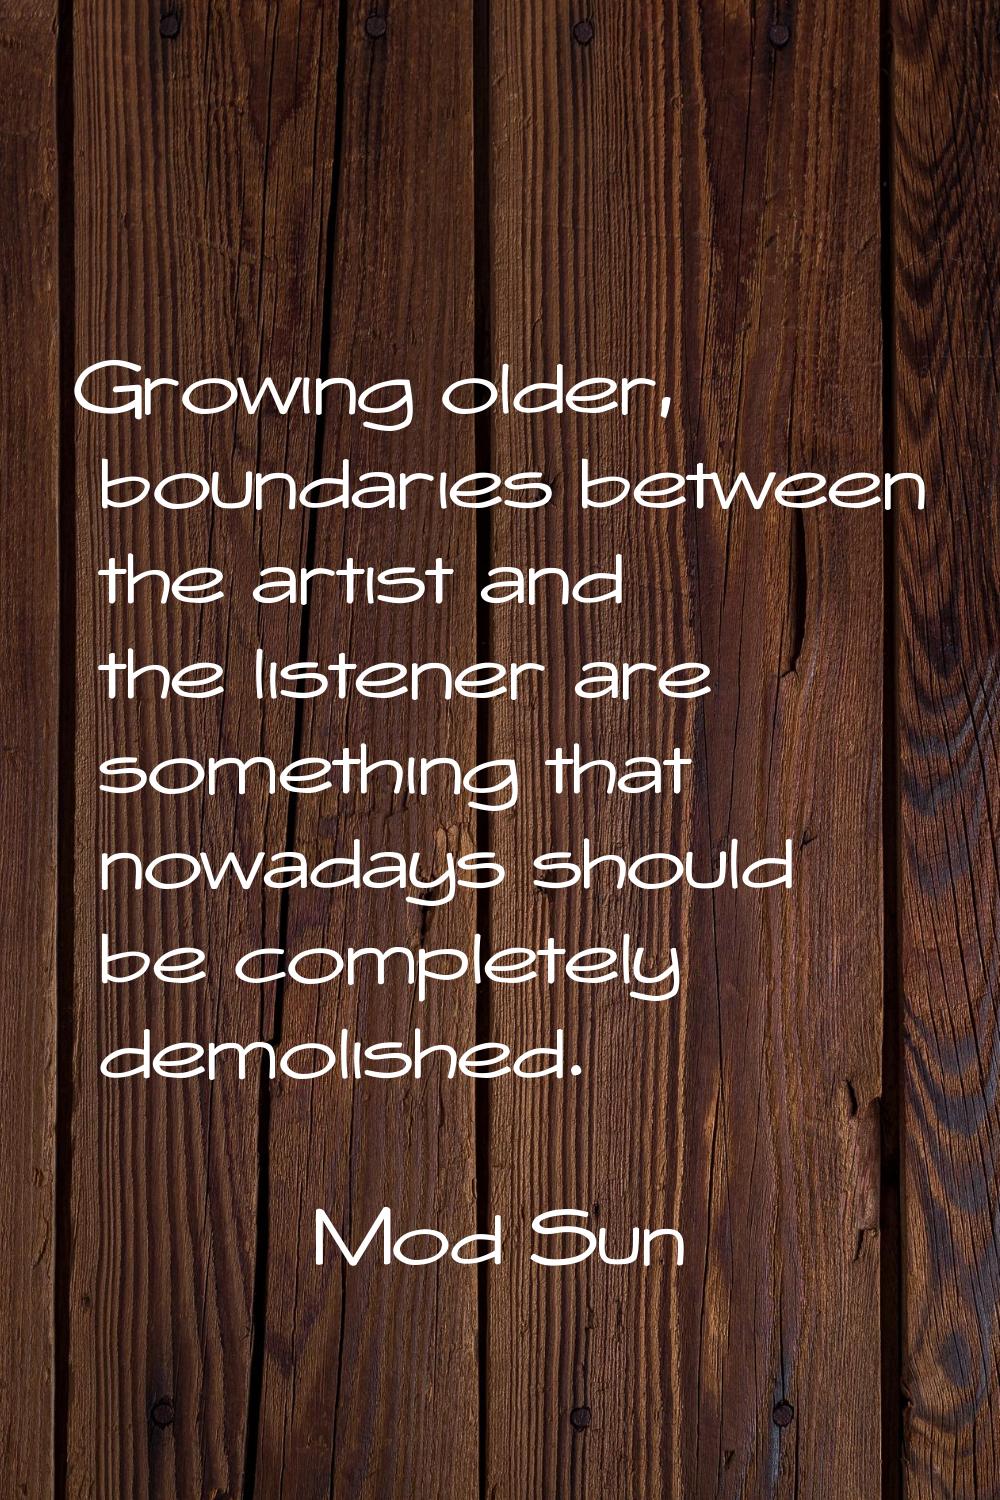 Growing older, boundaries between the artist and the listener are something that nowadays should be